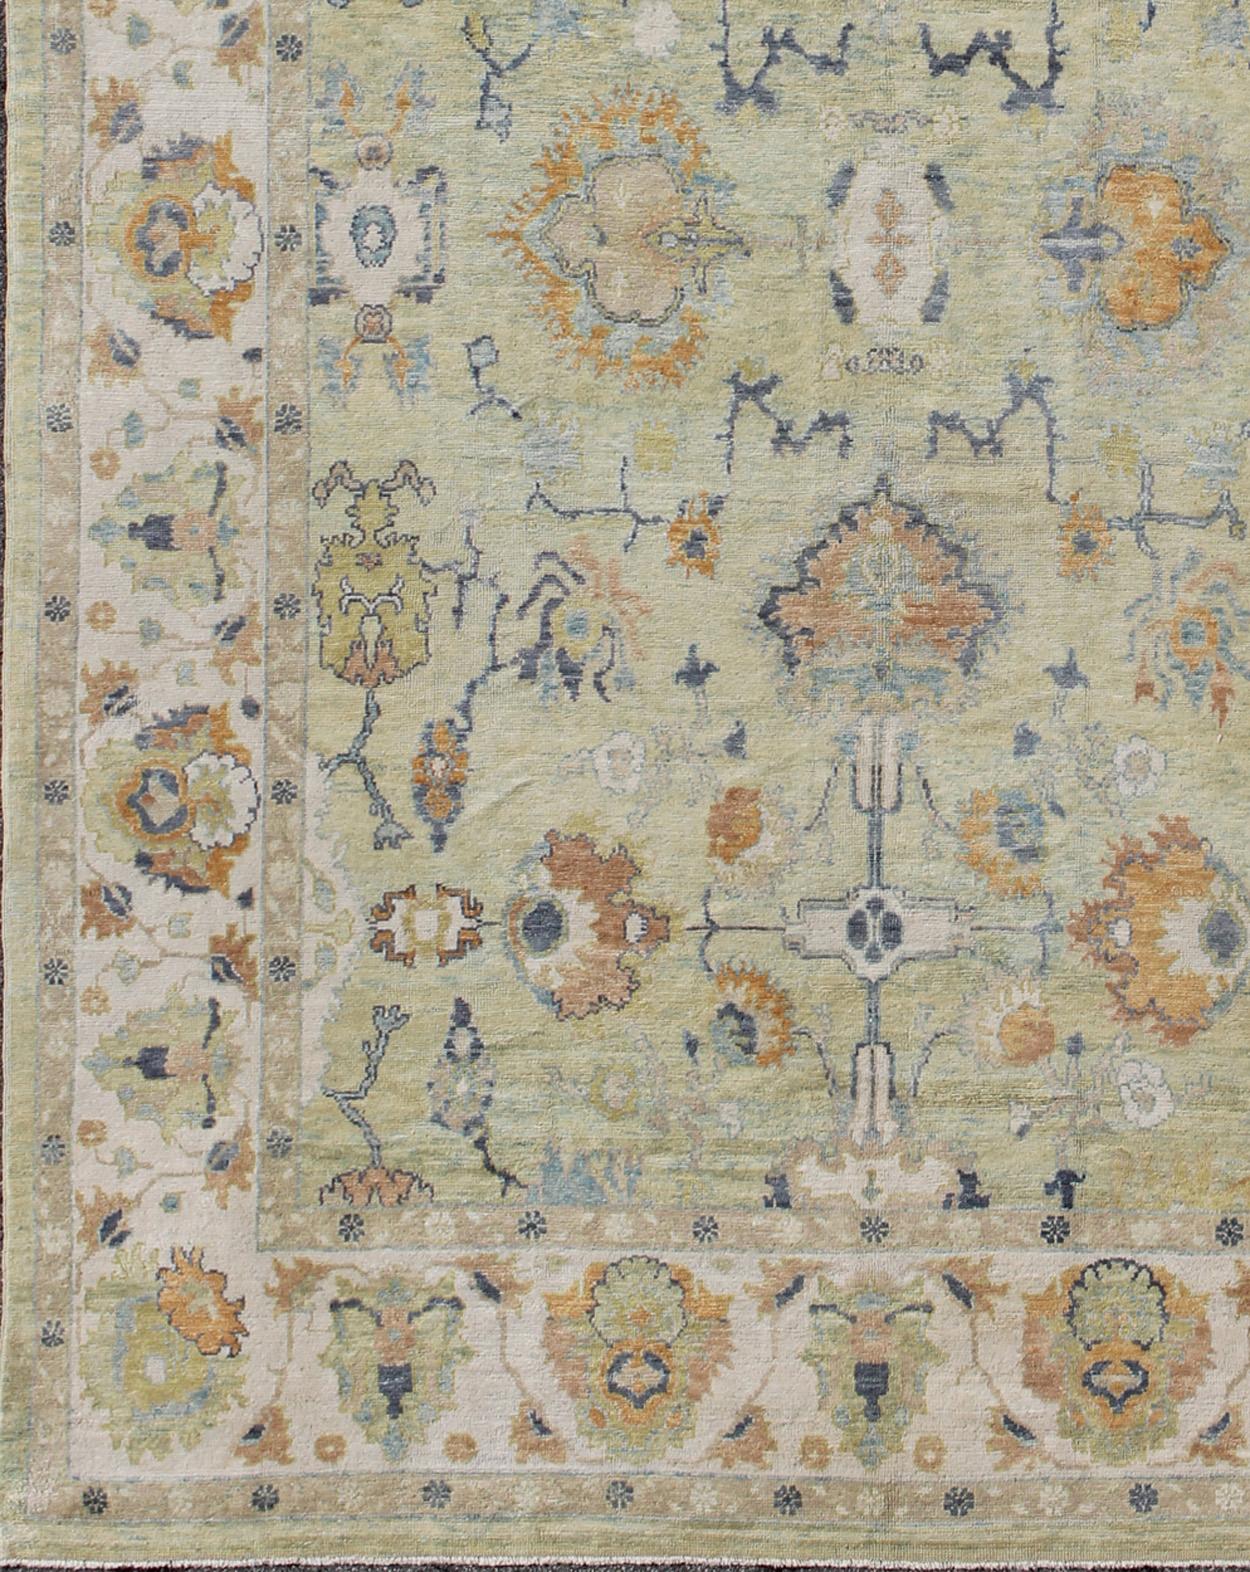 Turkish Oushak rug with neutral color palette and all-over flower design. Keivan Woven Arts /  rug EN-165700, country of origin / type: Turkey / Oushak
Measures: 10'9 x 16'.
This traditional Oushak rug from Turkey features a subdued, neutral color